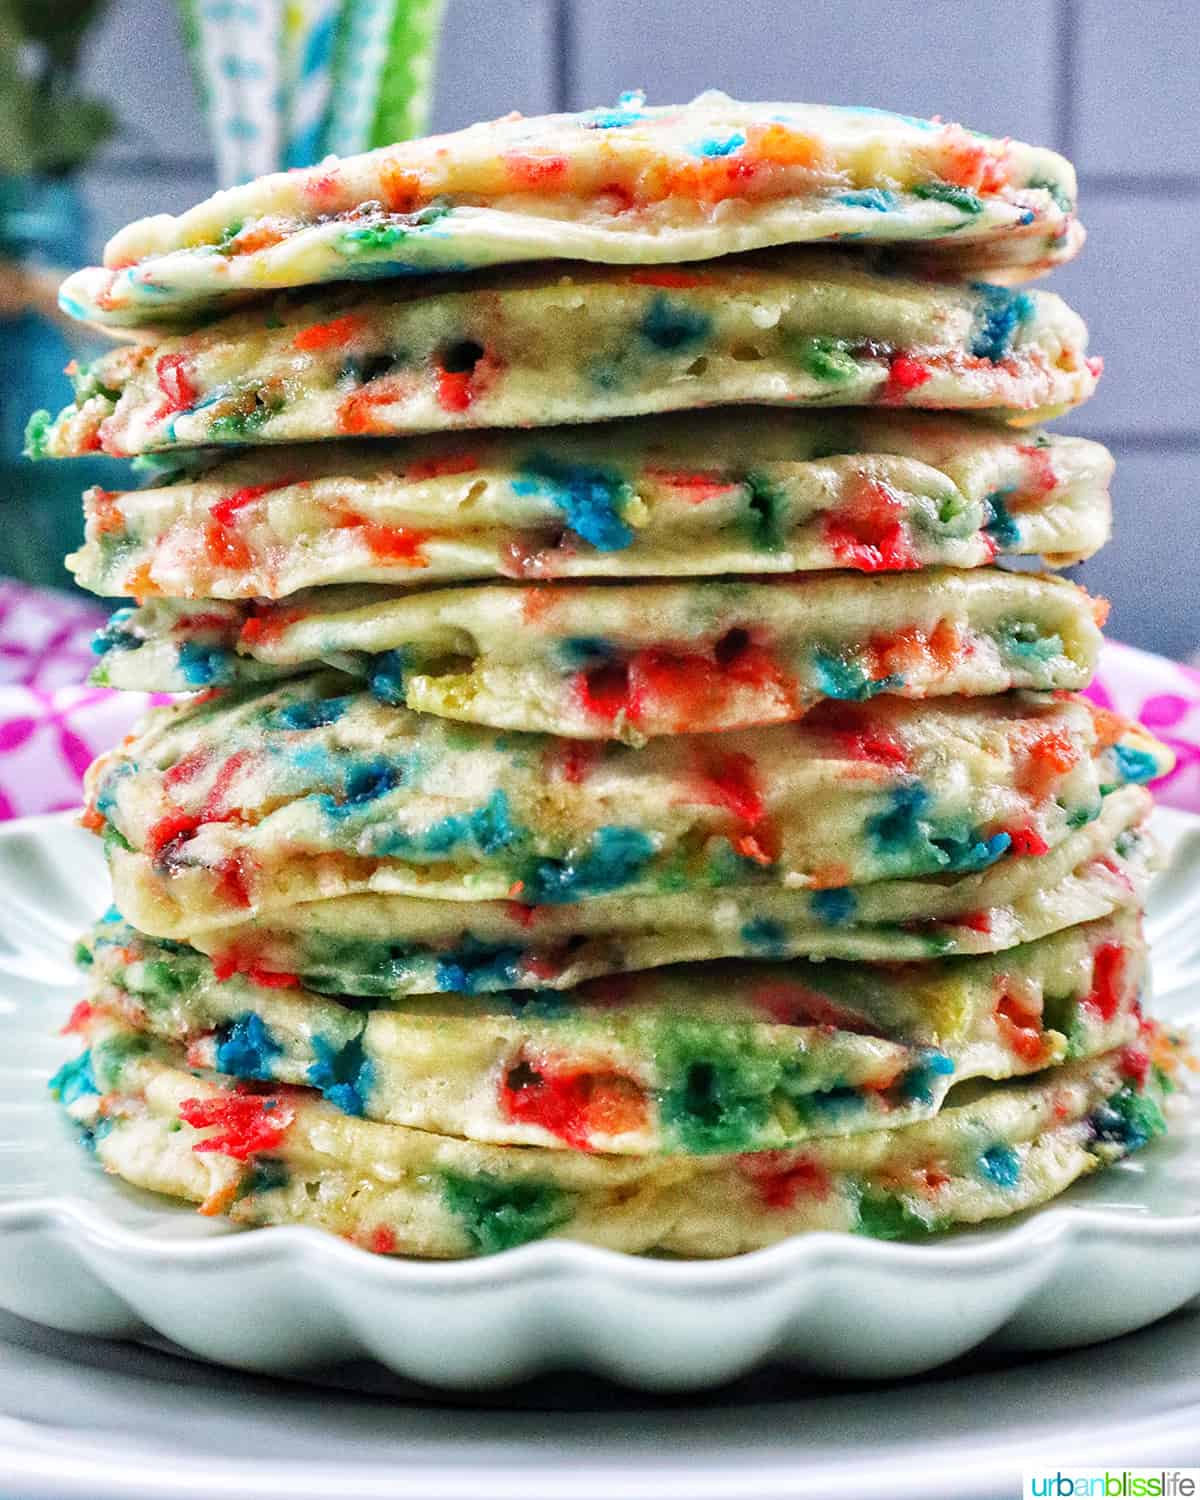 huge stack of funfetti pancakes on a scalloped green plate.